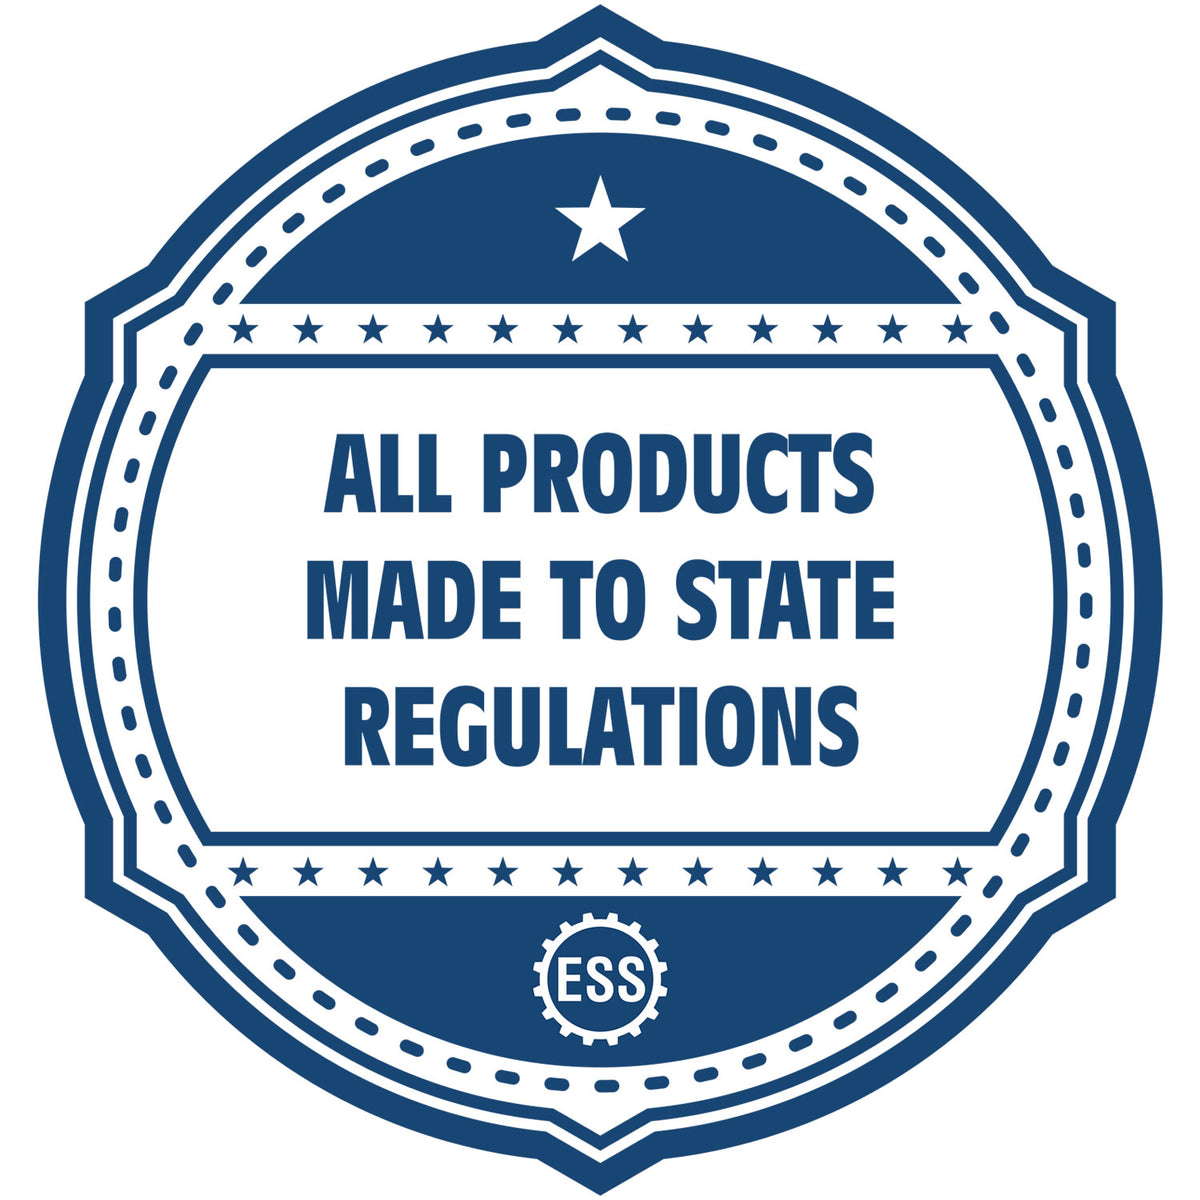 A blue icon or badge for the Gift Montana Landscape Architect Seal showing that this product is made in compliance with state regulations.